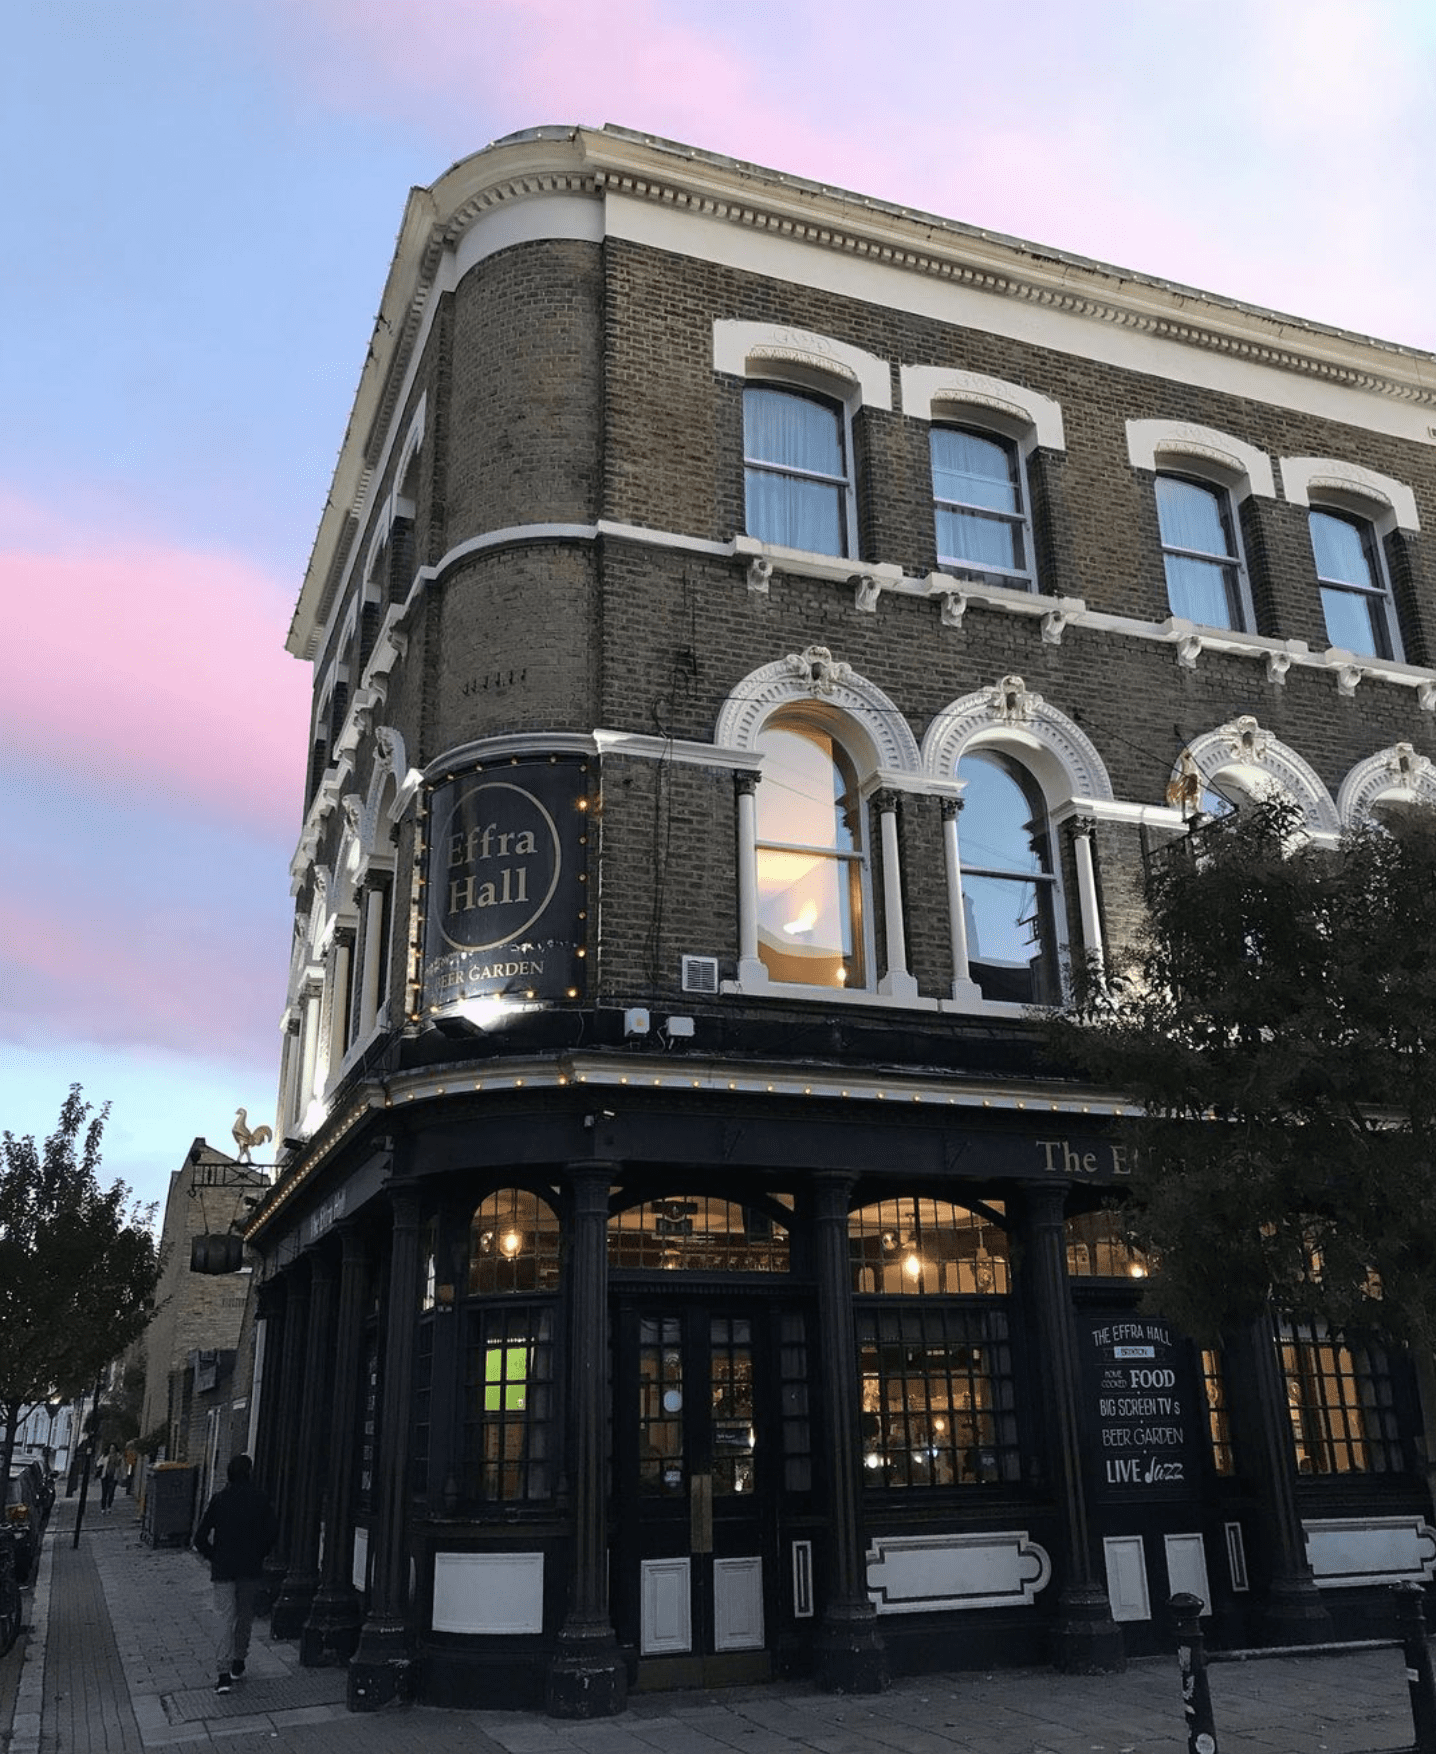 The best restaurants in Brixton, South London | The exterior of Effra Hall Tavern in Brixton